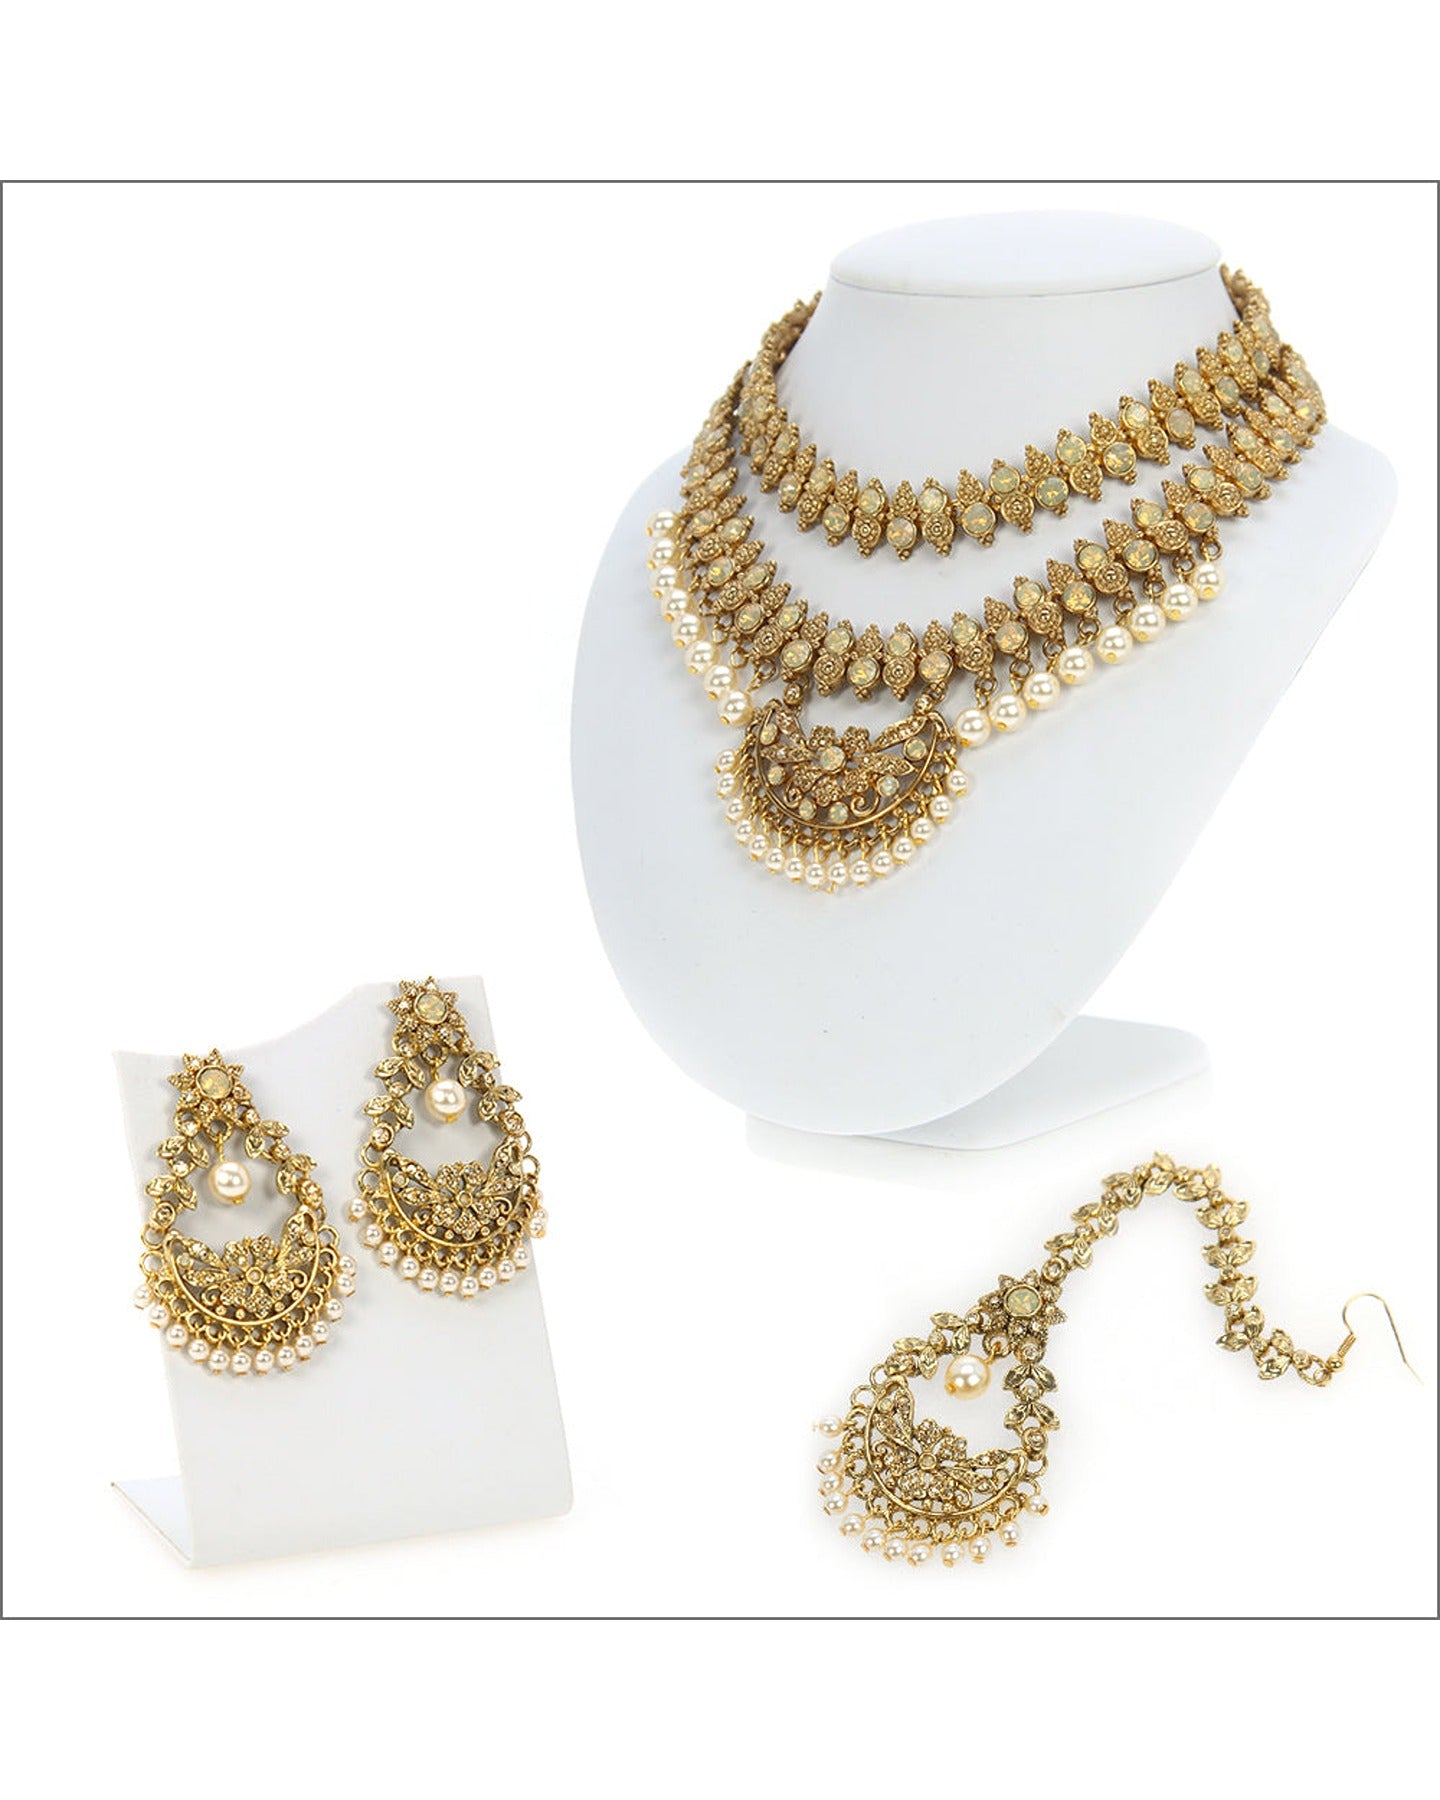 Antique Gold Jewelry with Ivory Cream and Crystal Golden Shadow Stones